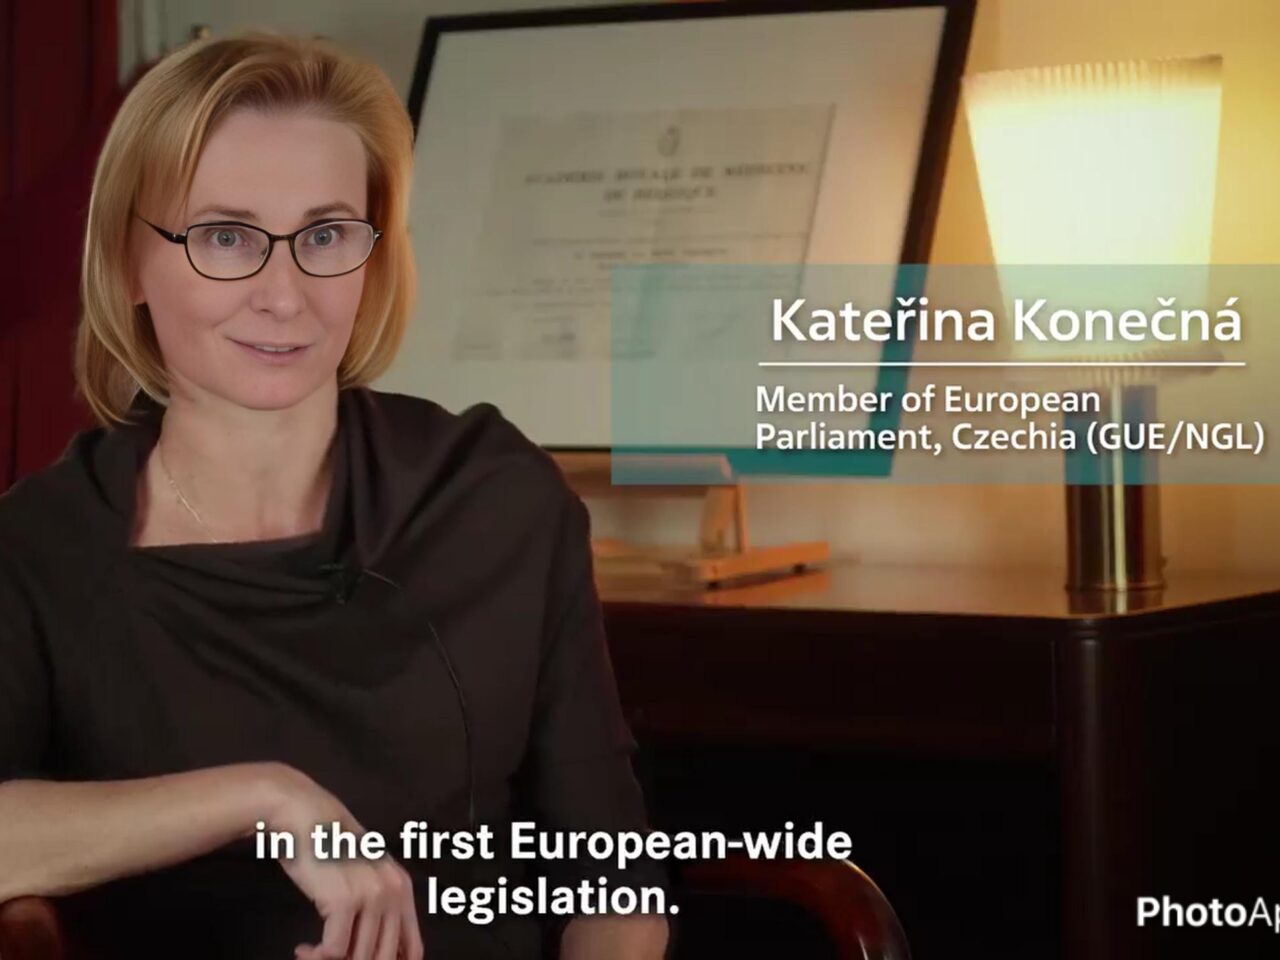 Françoise Meunier: MEP Kateřina Konečná reiterated her support for cancer survivor’s rights need to be guaranteed through legislative measures at the European level